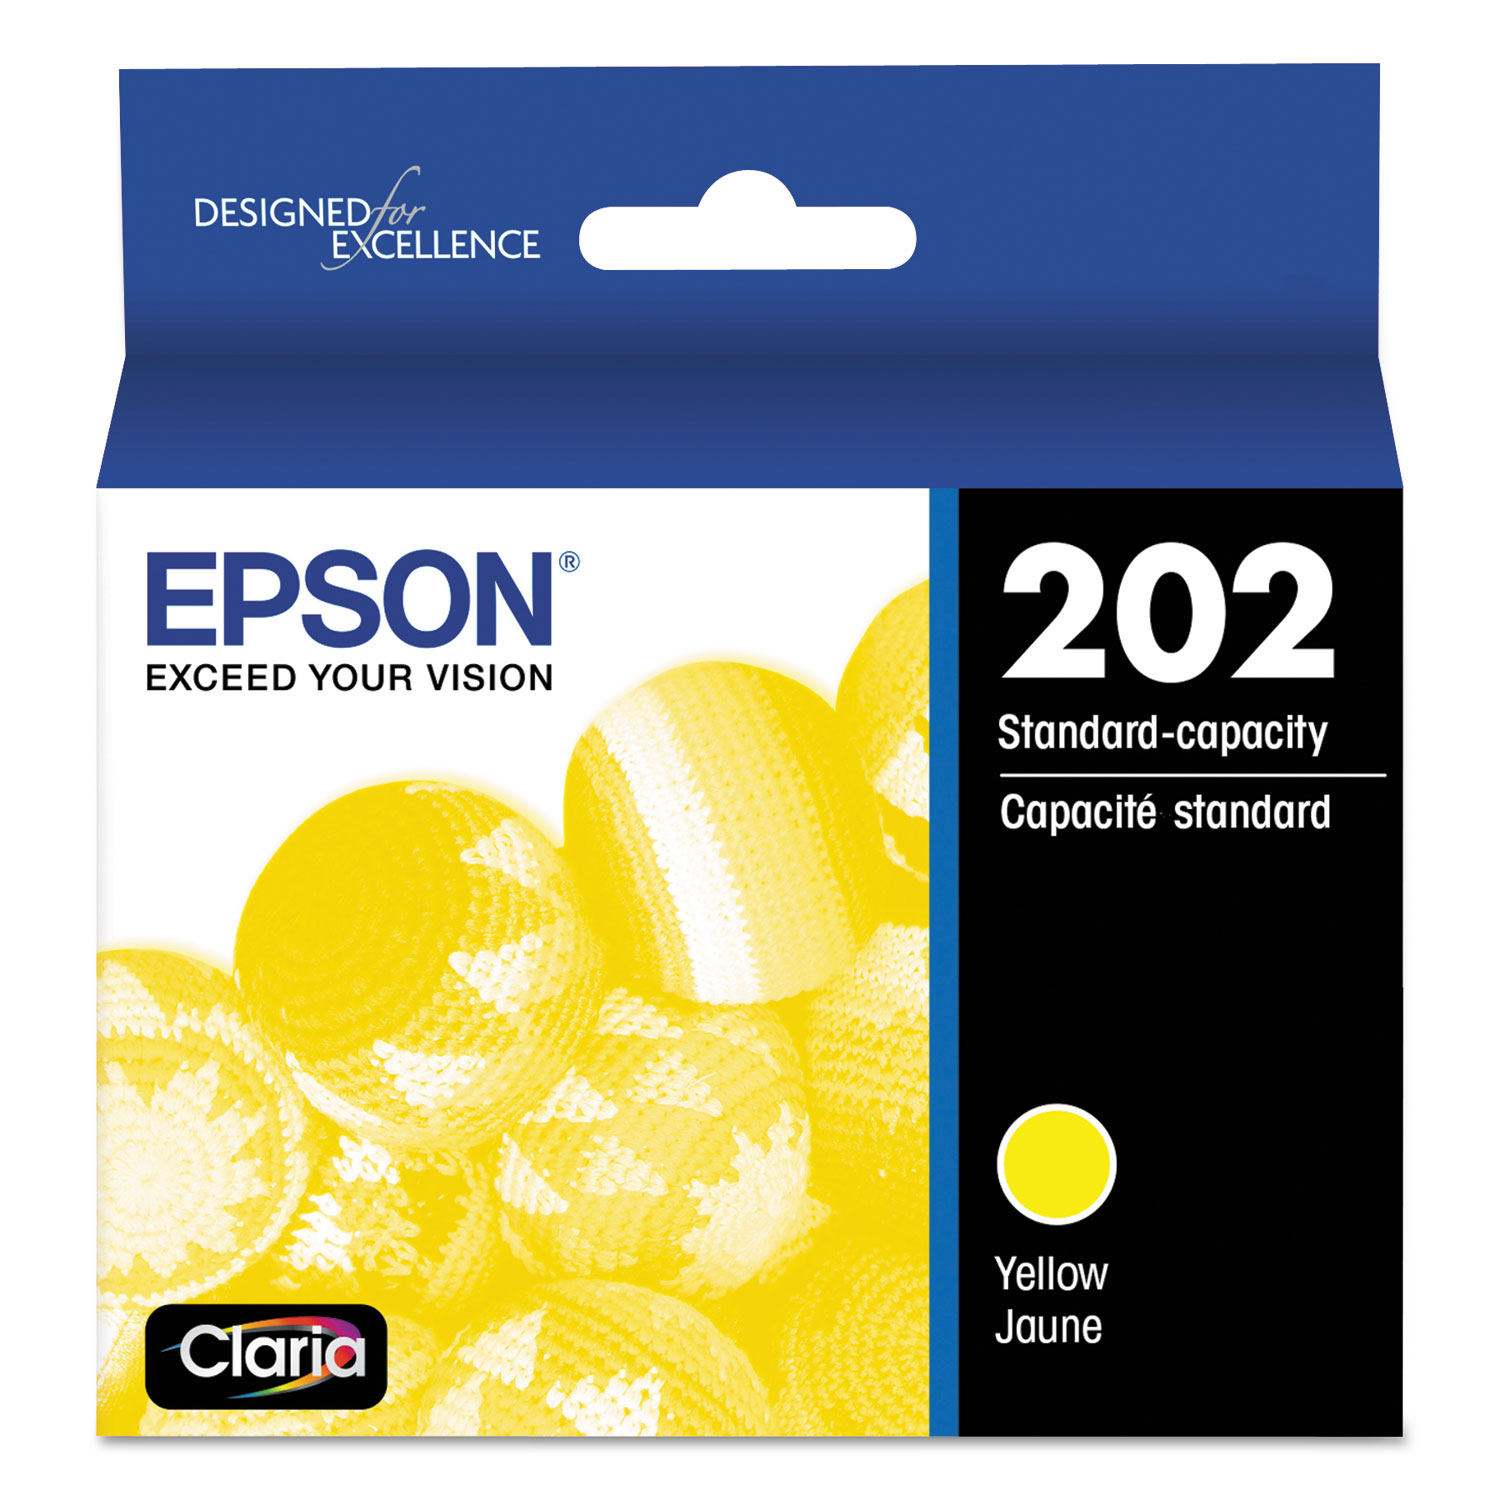  Epson T202420-S T202420S (202) Claria Ink, 165 Page-Yield, Yellow (EPST202420S) 